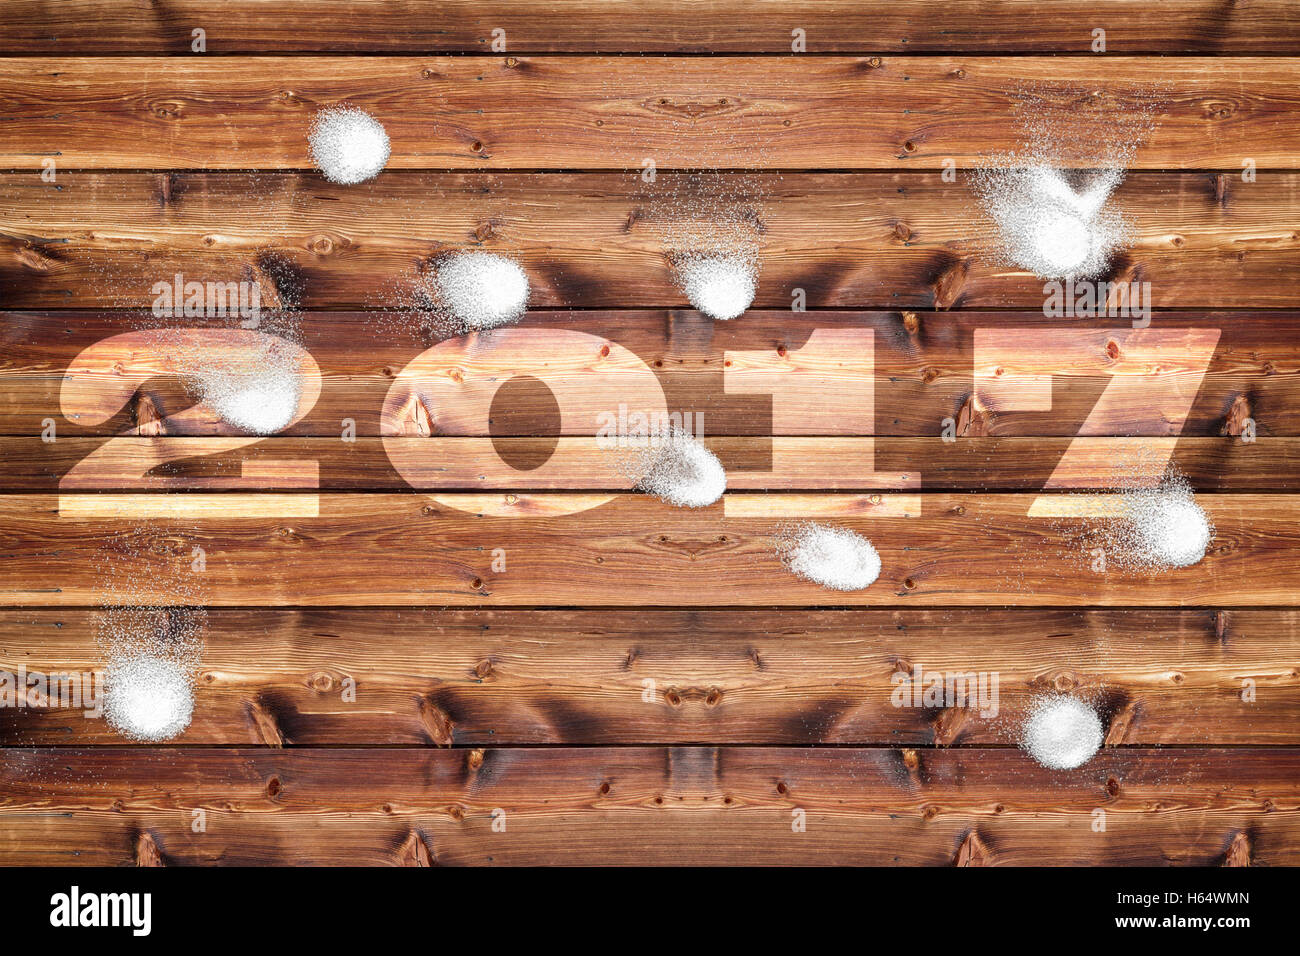 Wooden board with bleached out 2017 letters, which is bombarded with snowballs. Stock Photo